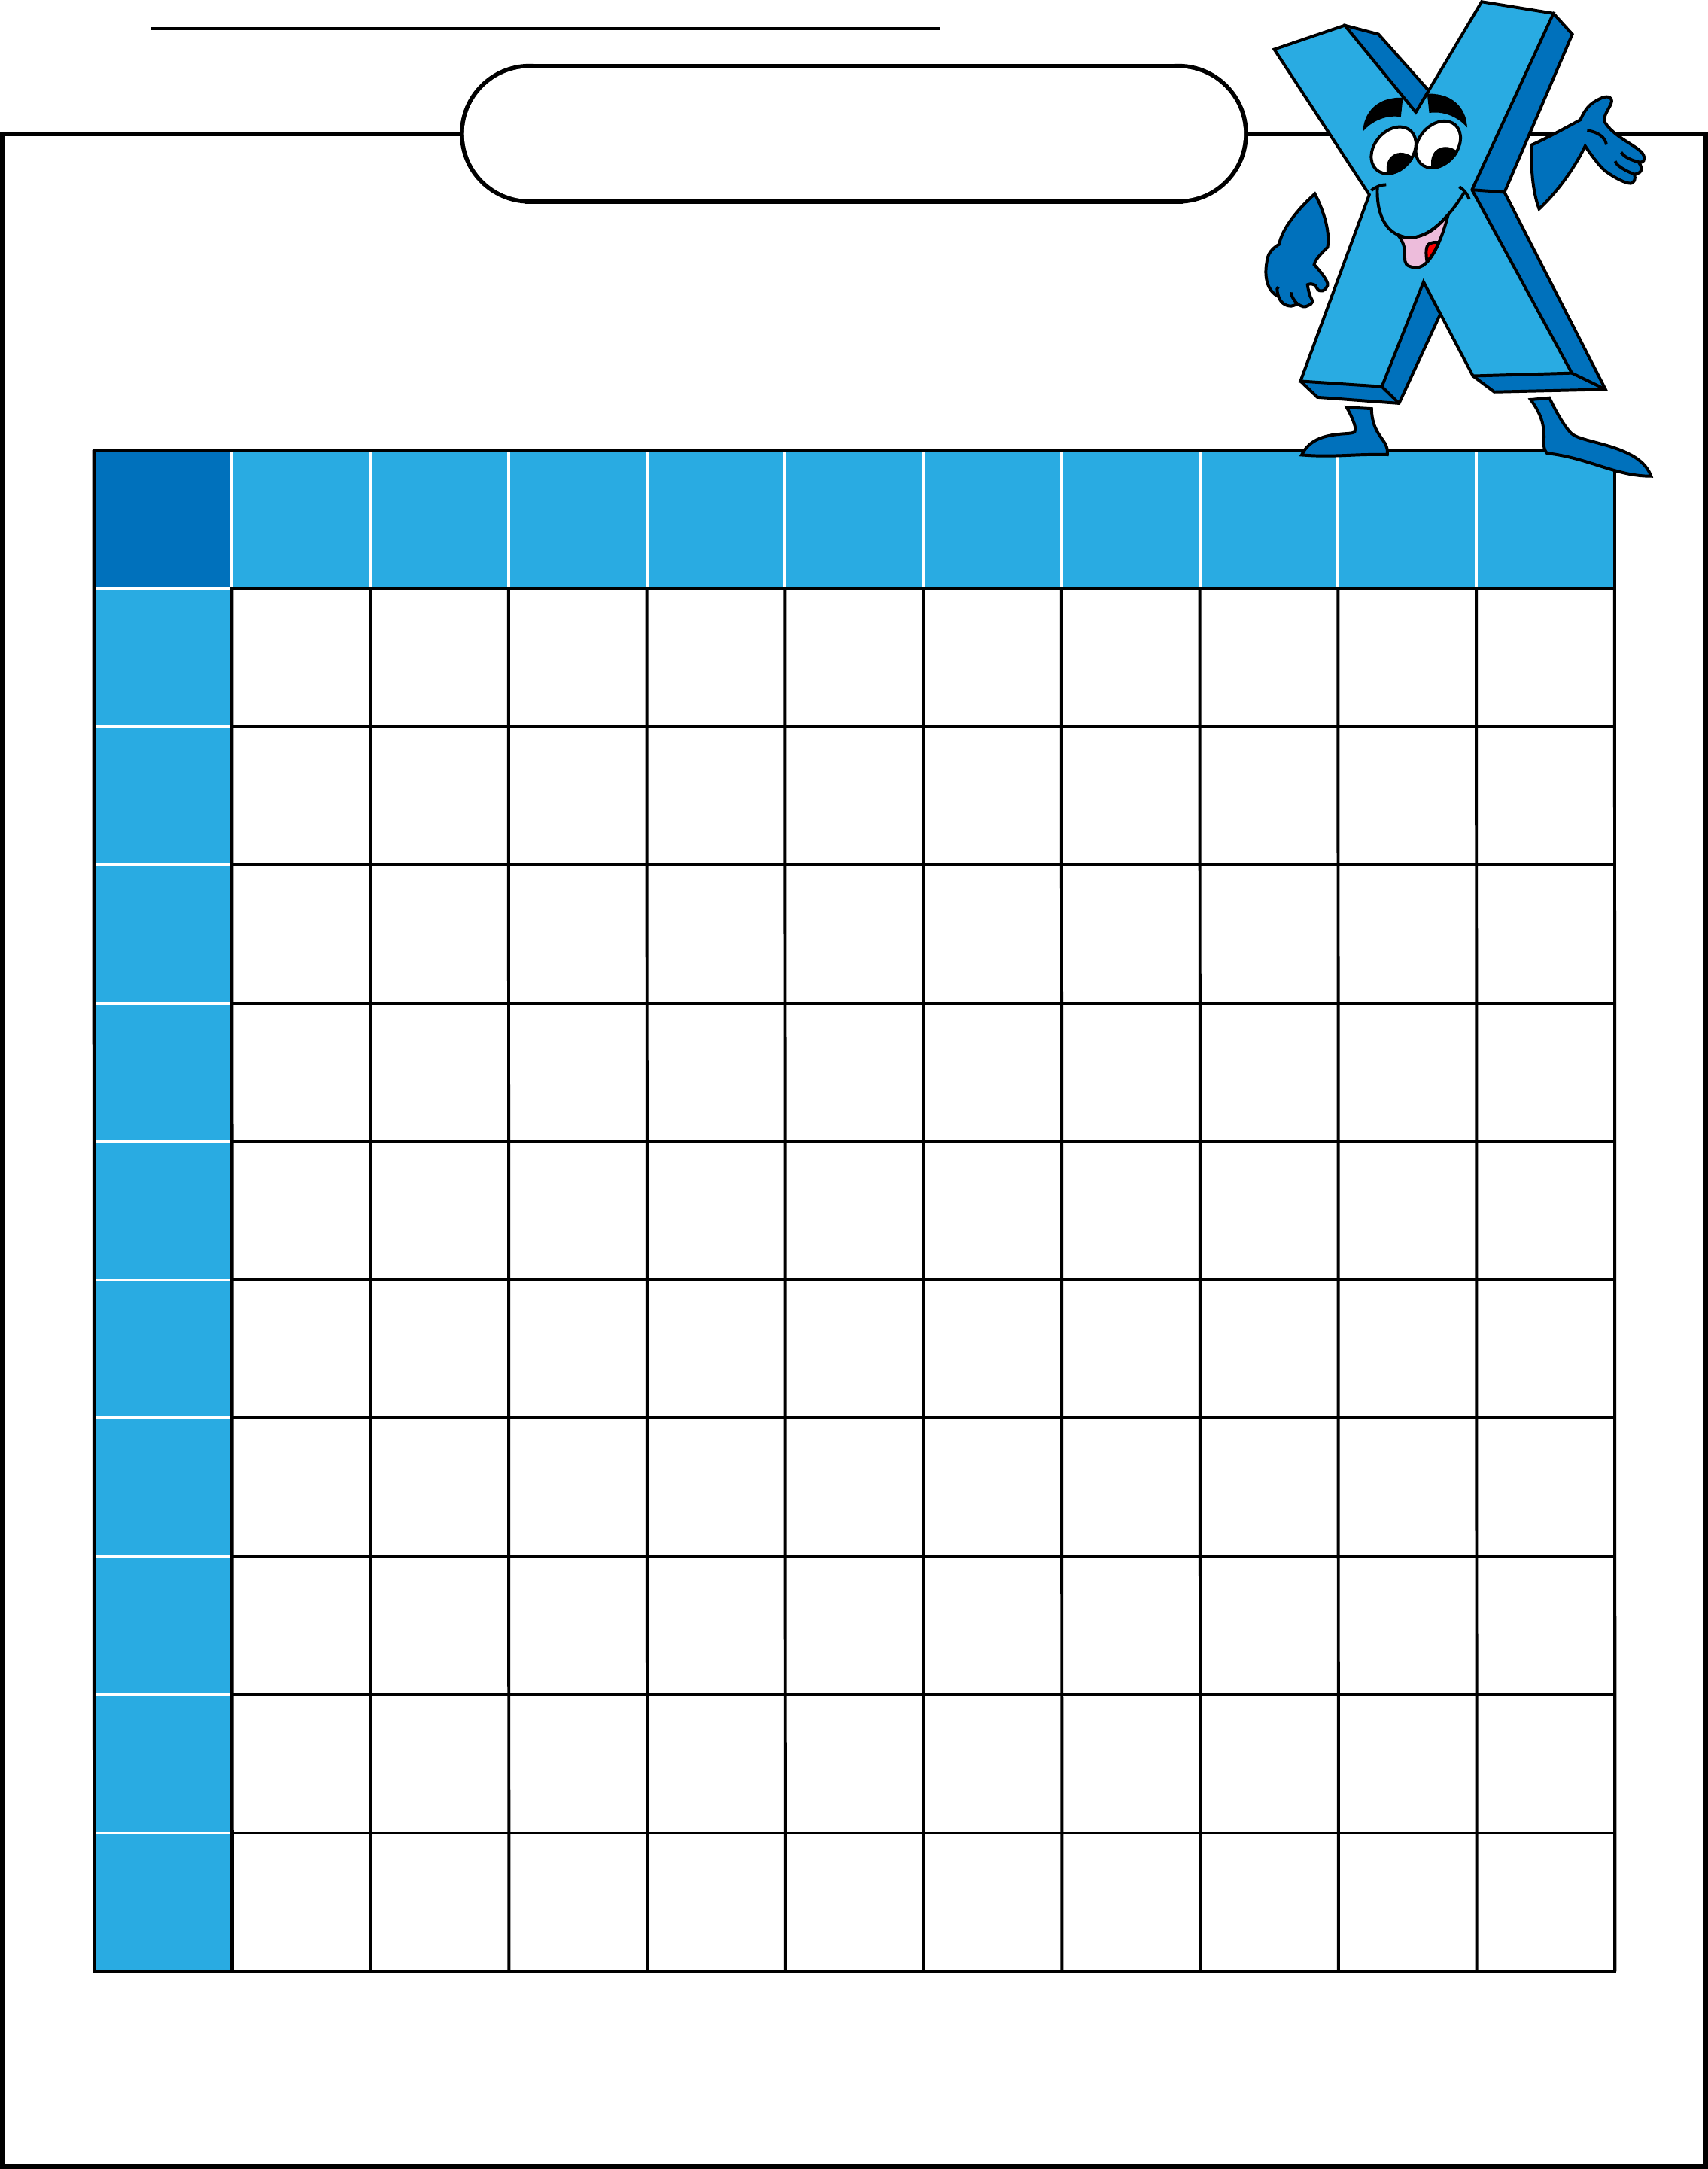 Blank Multiplication Table Free Download